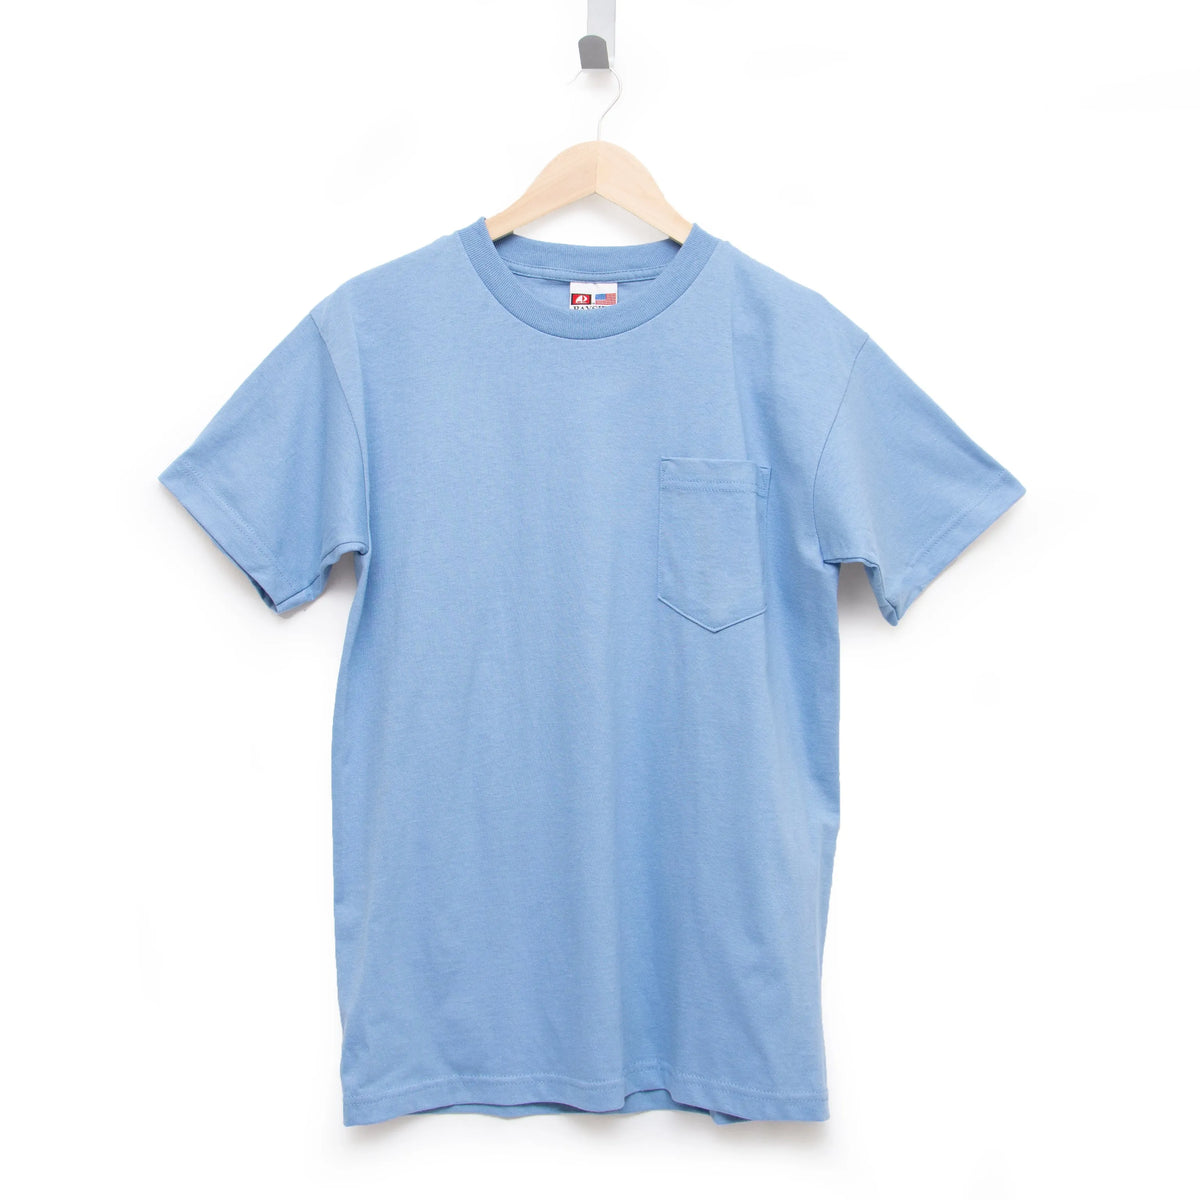 Cotton T-Shirt With Pocket For Sale - All American Clothing Co